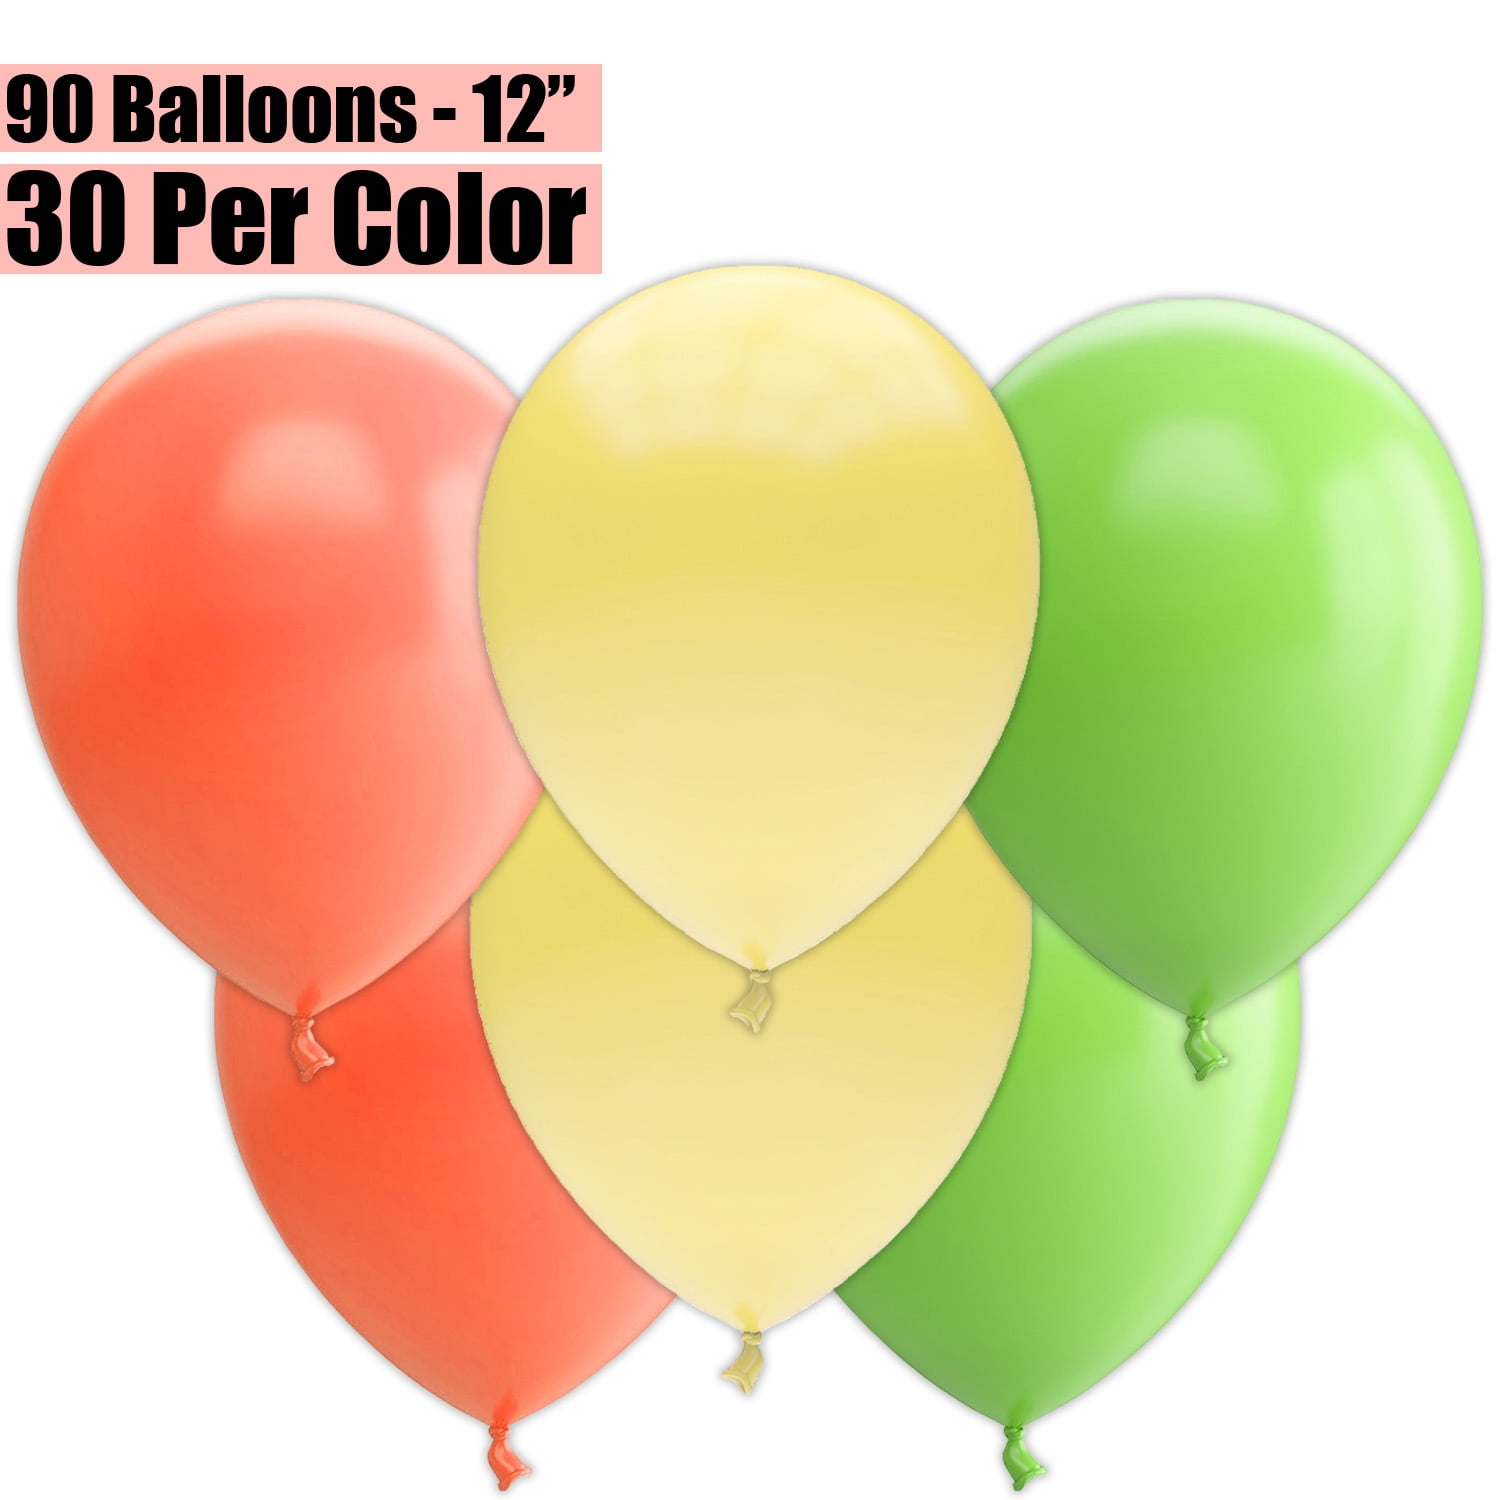 30 Large PLAIN BALOONS helium baloons Quality Party For Mothers Day Birthday 